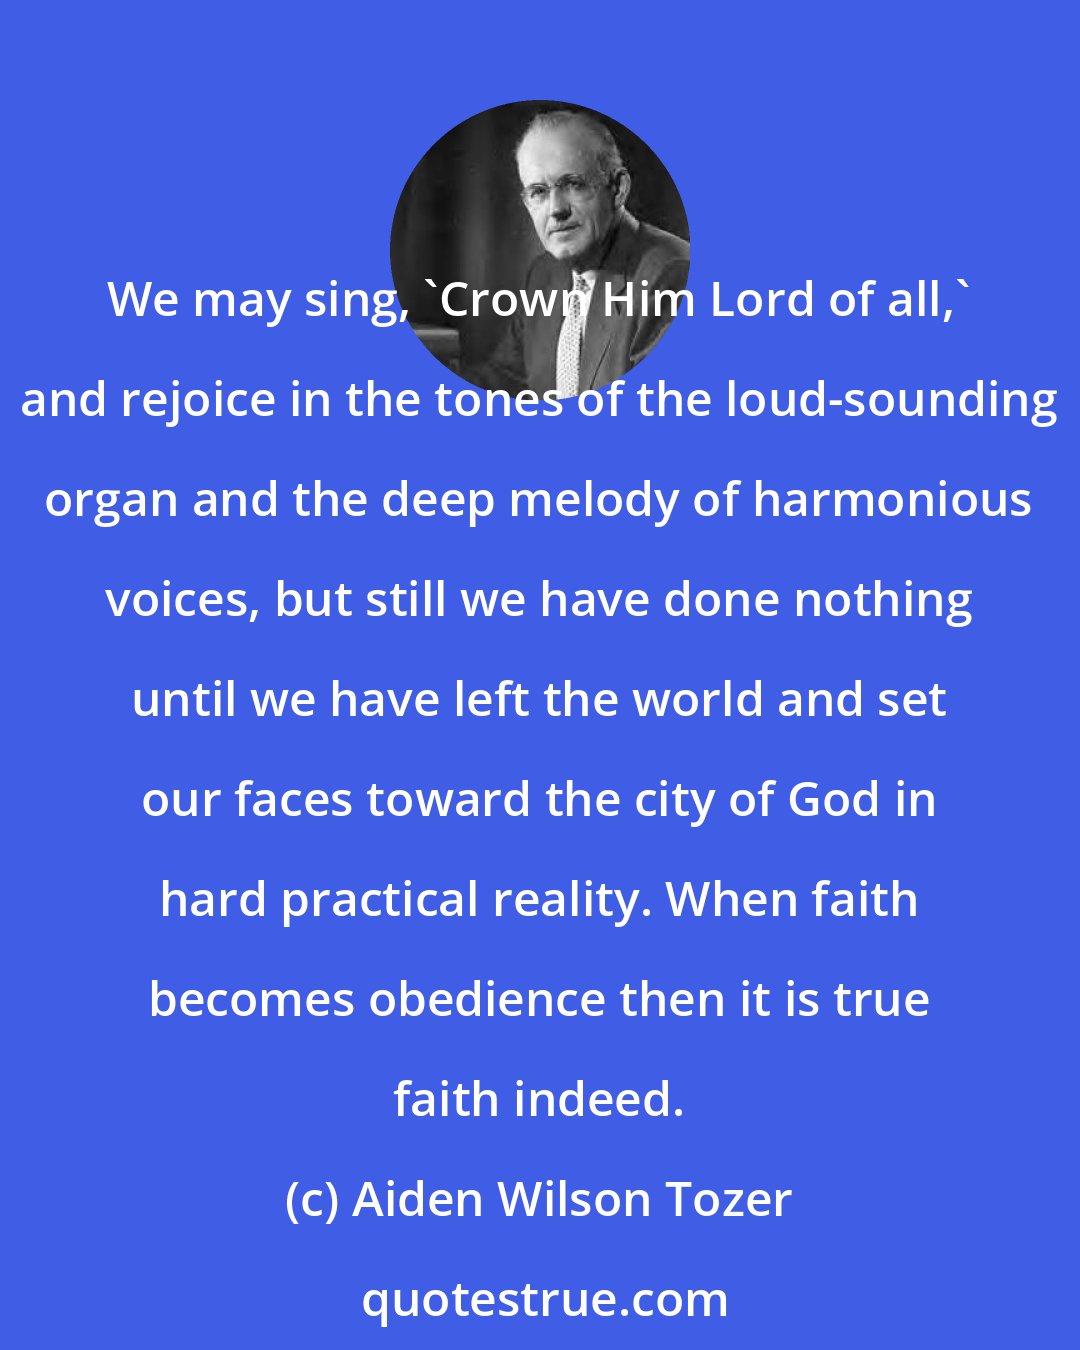 Aiden Wilson Tozer: We may sing, 'Crown Him Lord of all,' and rejoice in the tones of the loud-sounding organ and the deep melody of harmonious voices, but still we have done nothing until we have left the world and set our faces toward the city of God in hard practical reality. When faith becomes obedience then it is true faith indeed.